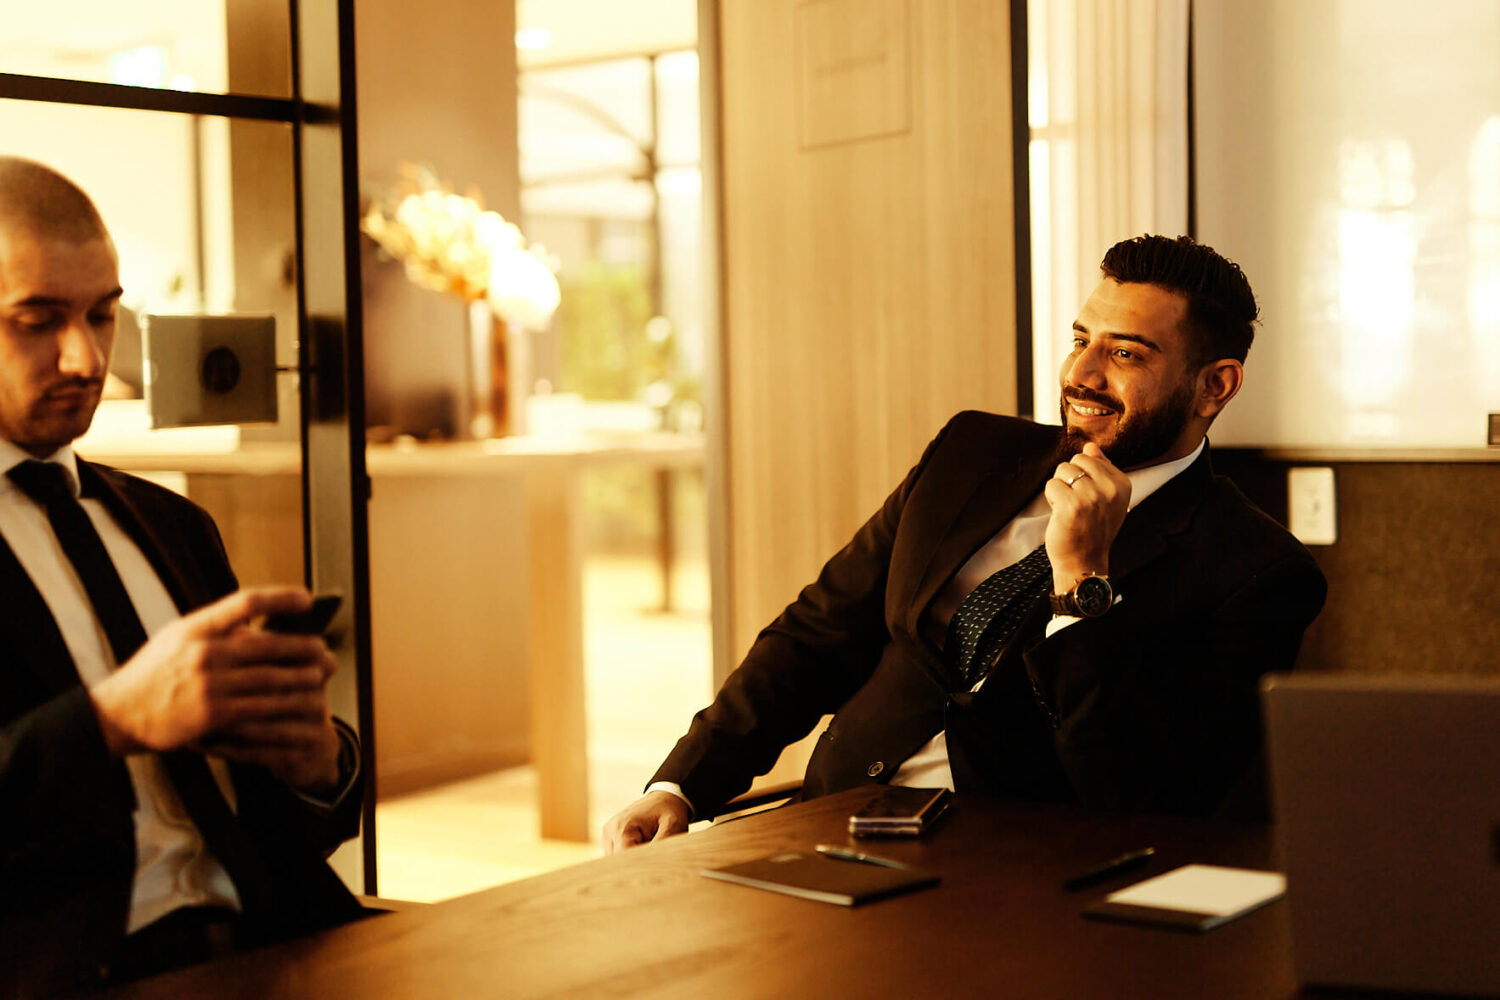 2 men are in a meeting.  Both are in suits and one is looking at his phone.
It's golden hour at sunset and the meeting room is filled with golden light. Photo by Photoform*.